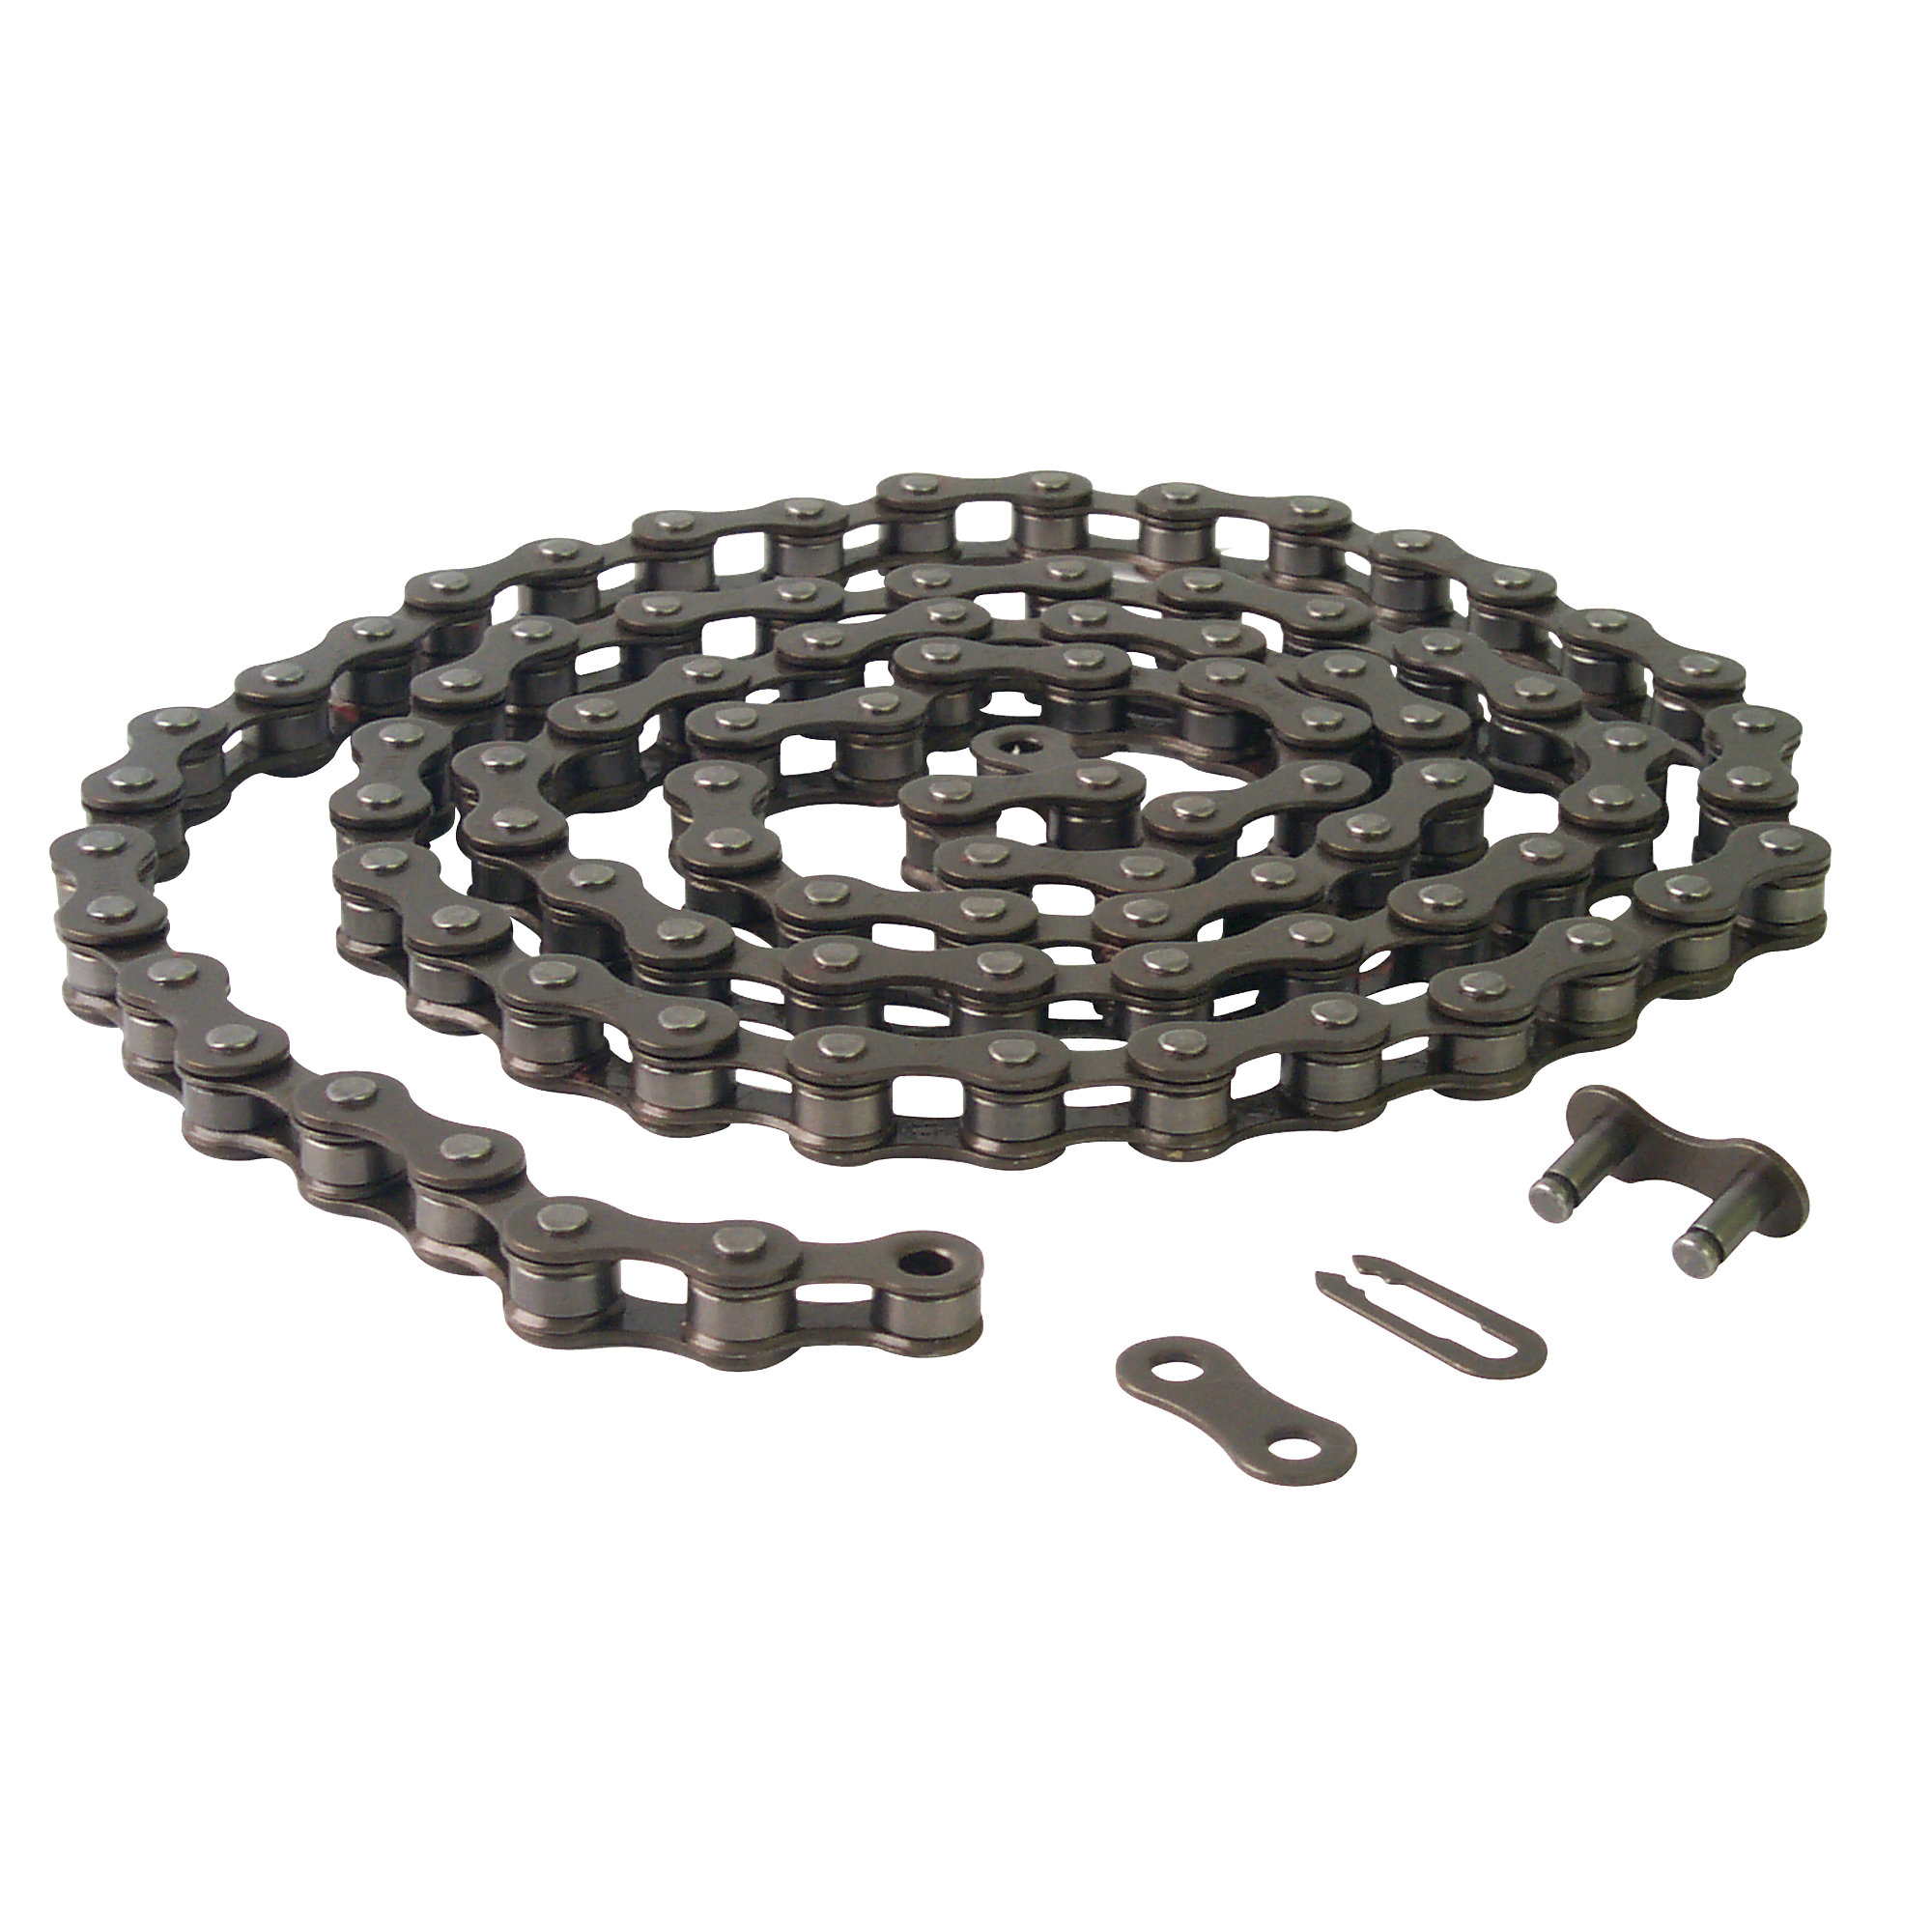 Chain for Idler to Fan, Schwinn AD3 and AD4